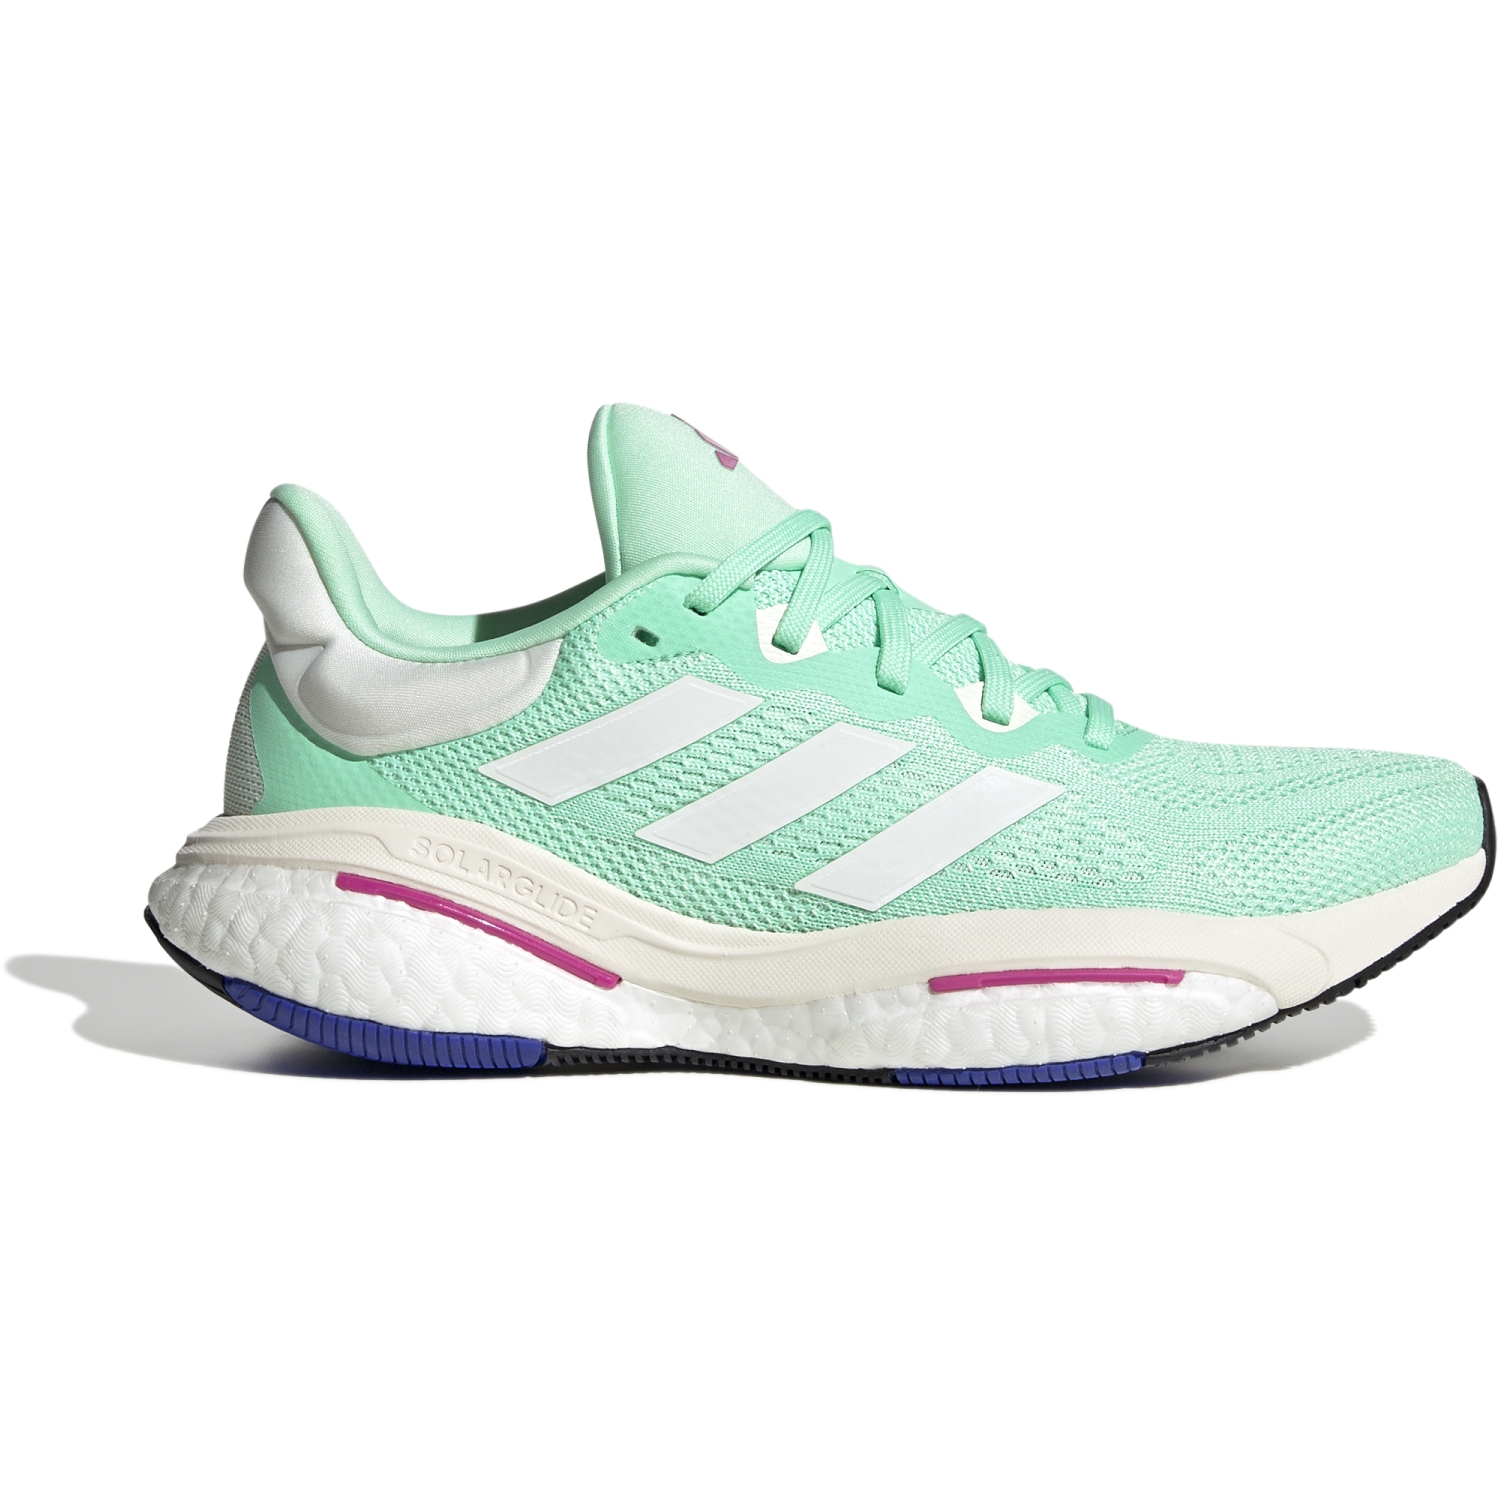 Picture of adidas Solarglide 6 Running Shoes Women - pull mint/zero mint/lucid fuchsia GV9151